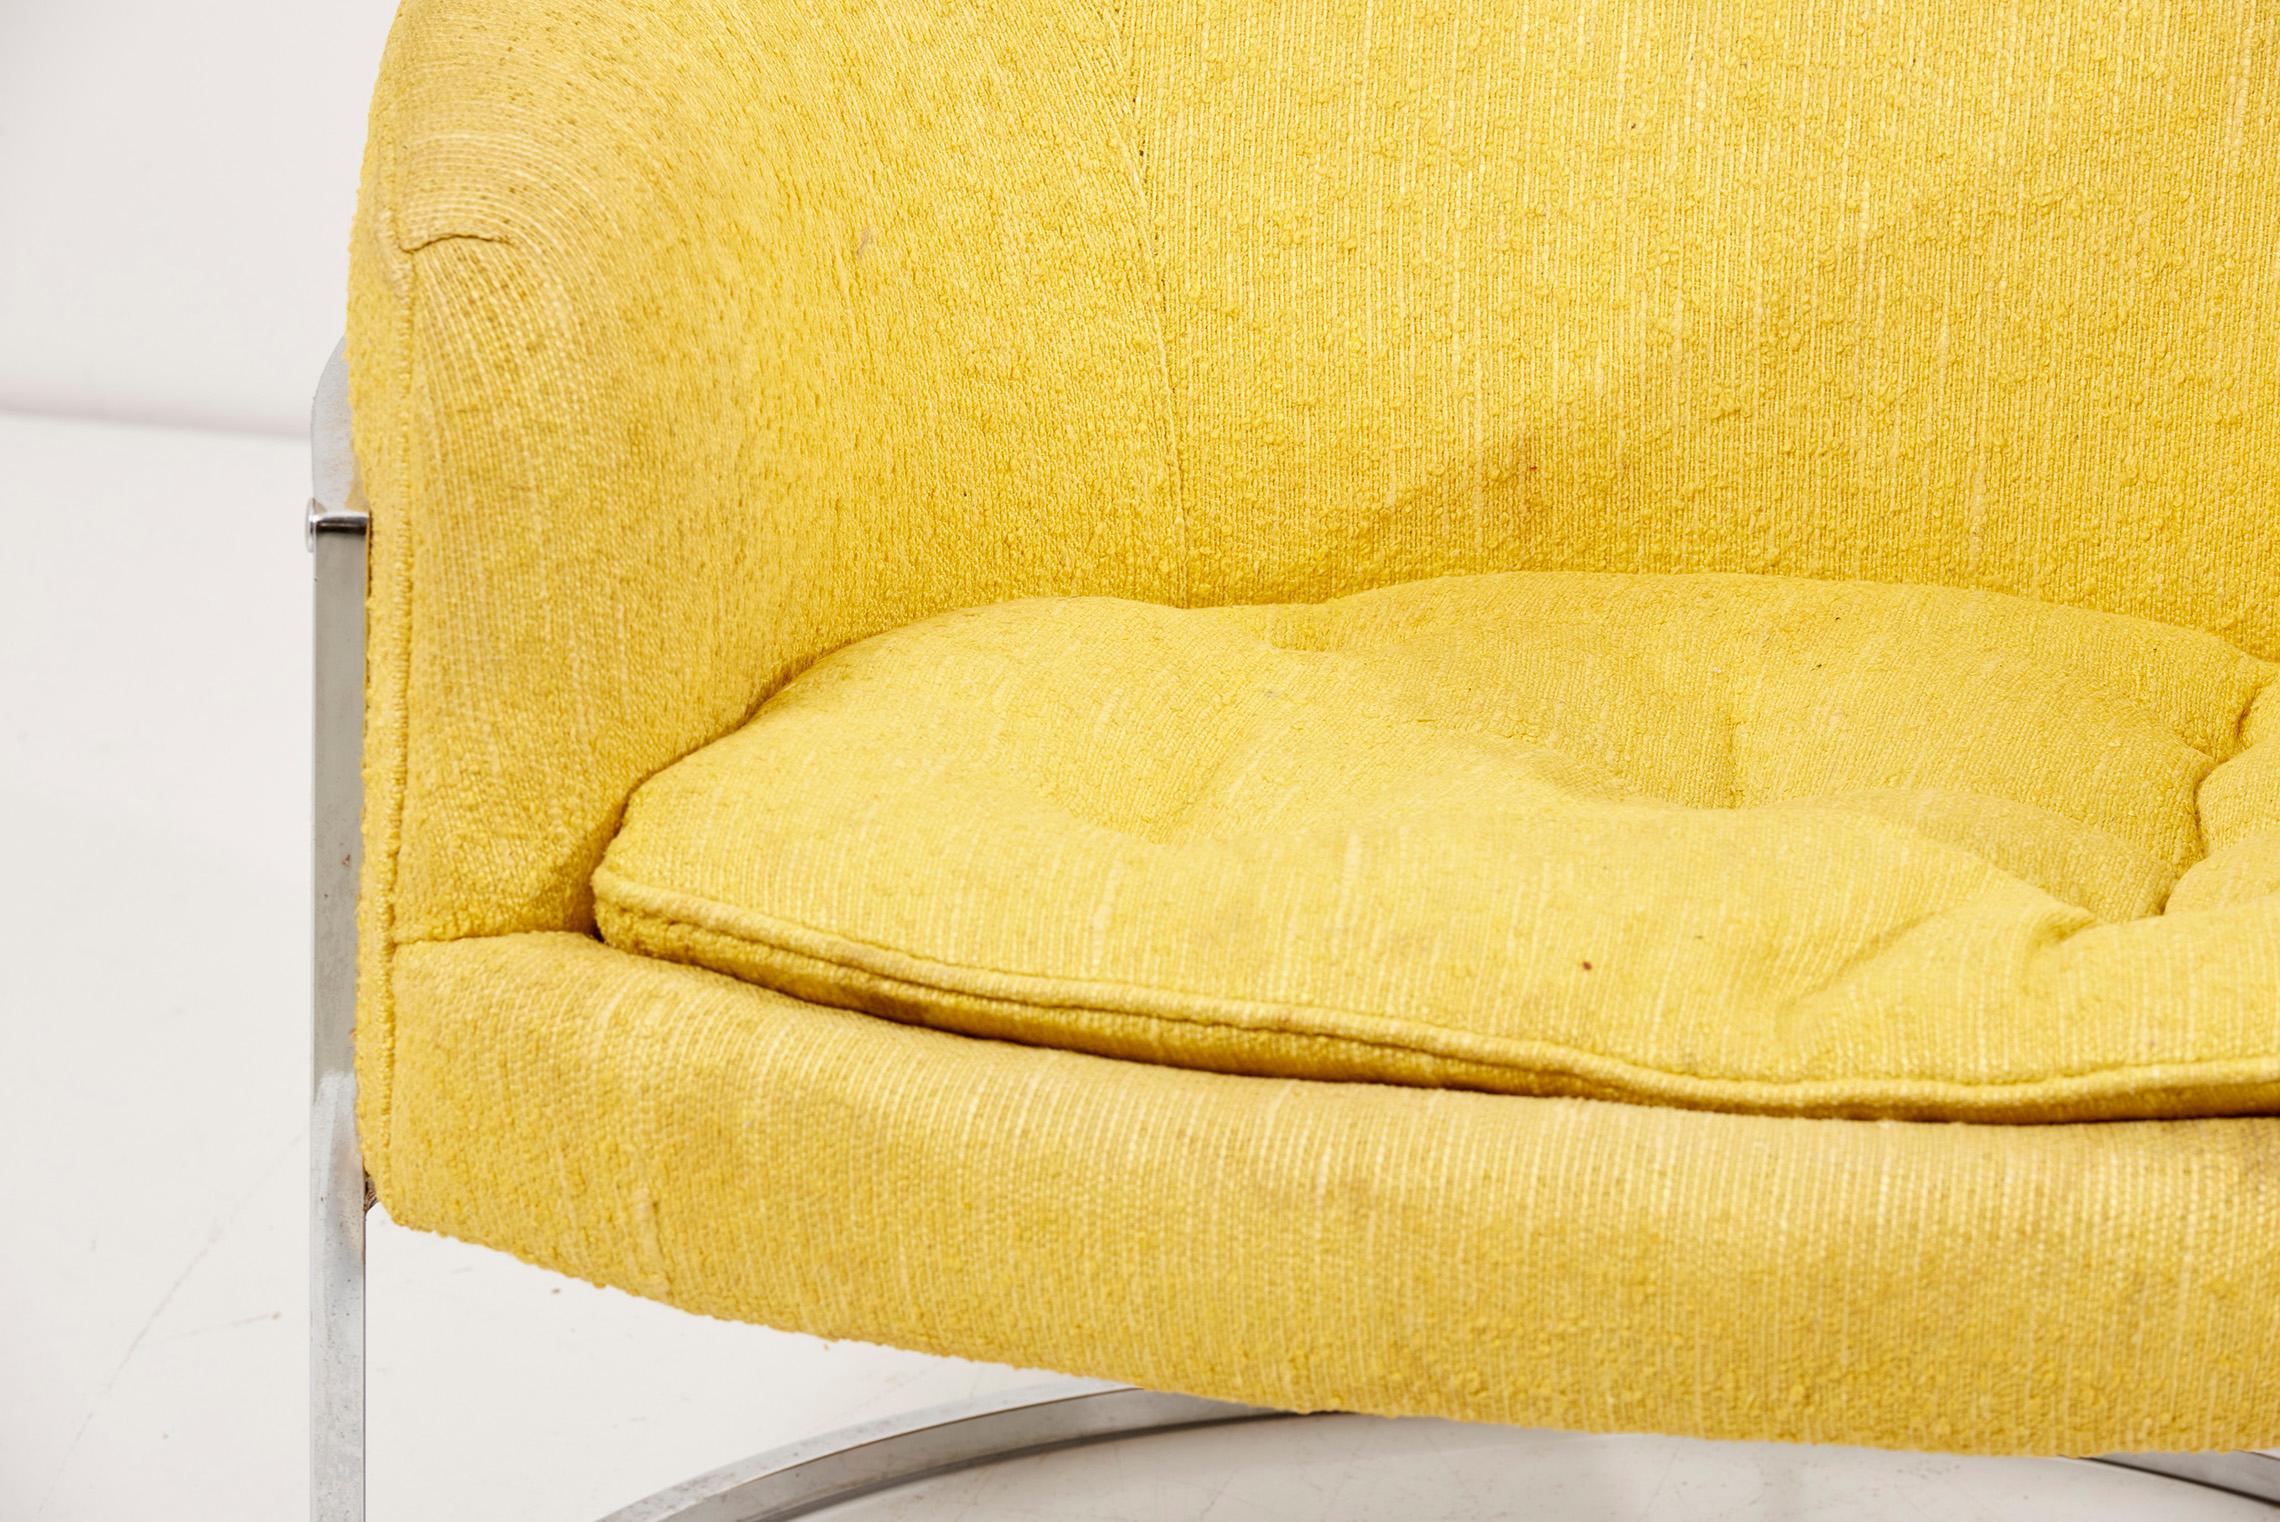 Pair of yellow Bernhadt Lounge Chairs, USA, 1960s For Sale 9